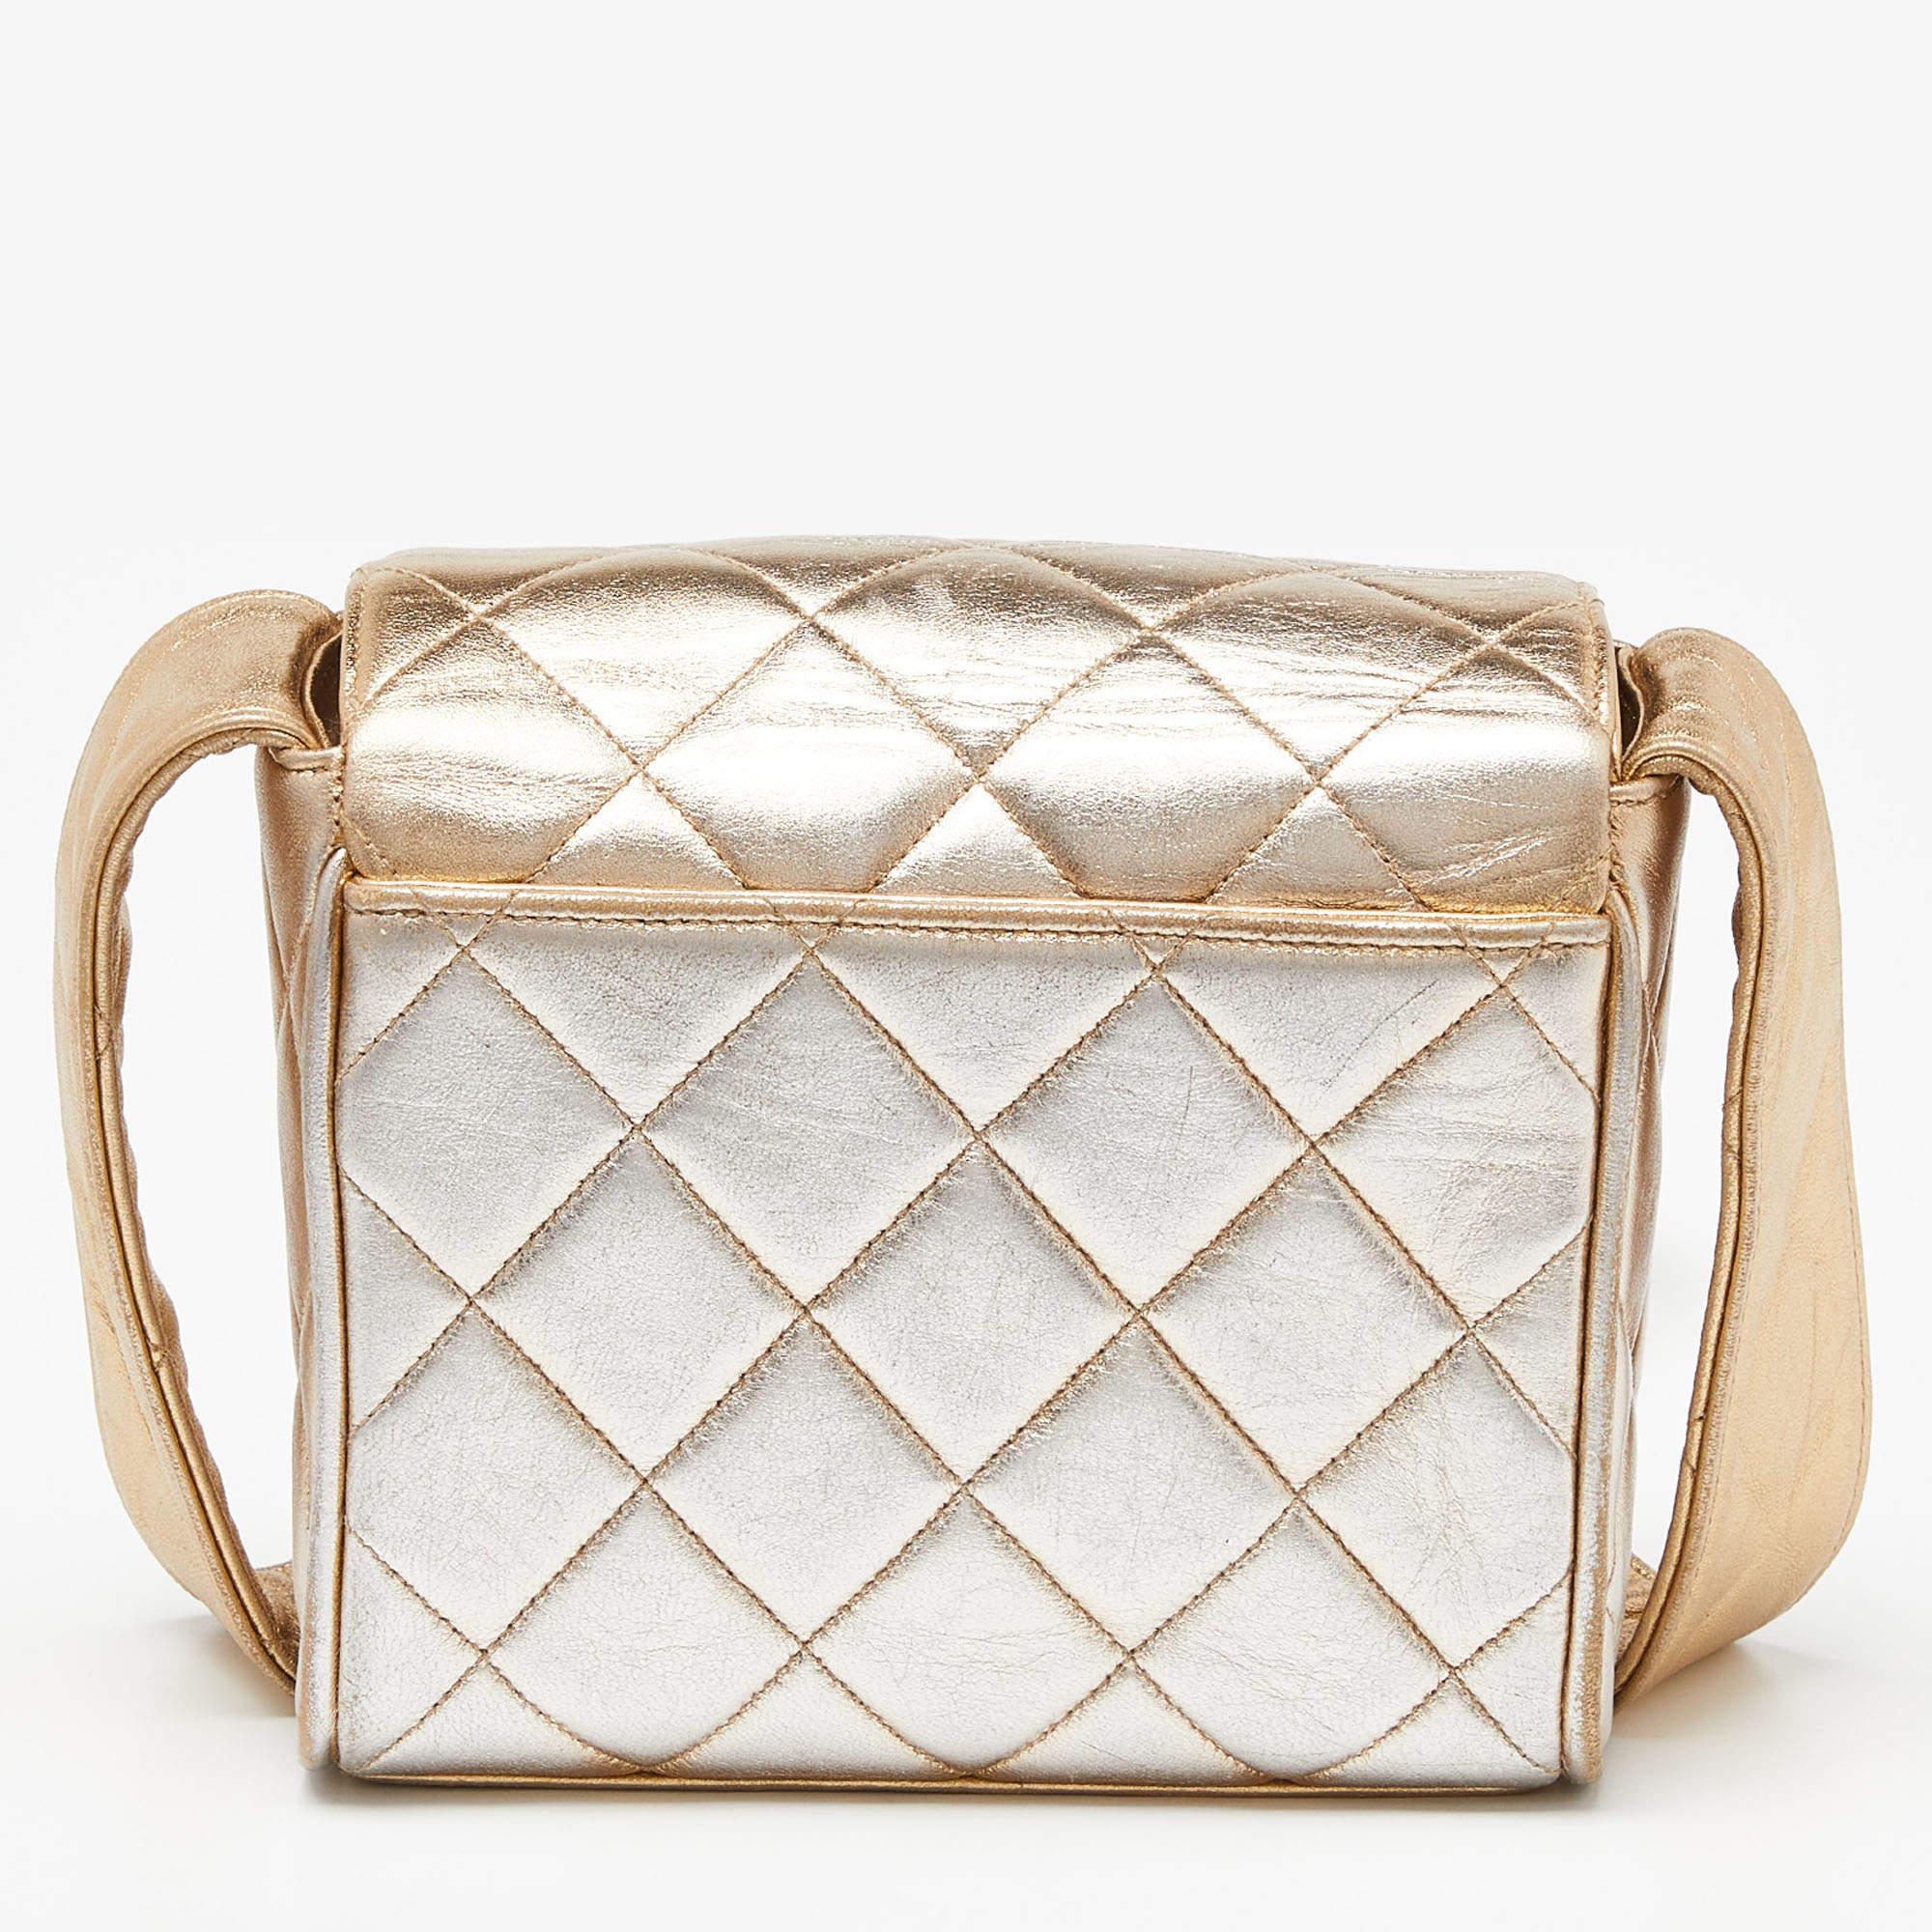 Chanel Gold Quilted Leather CC Flap Shoulder Bag For Sale 5